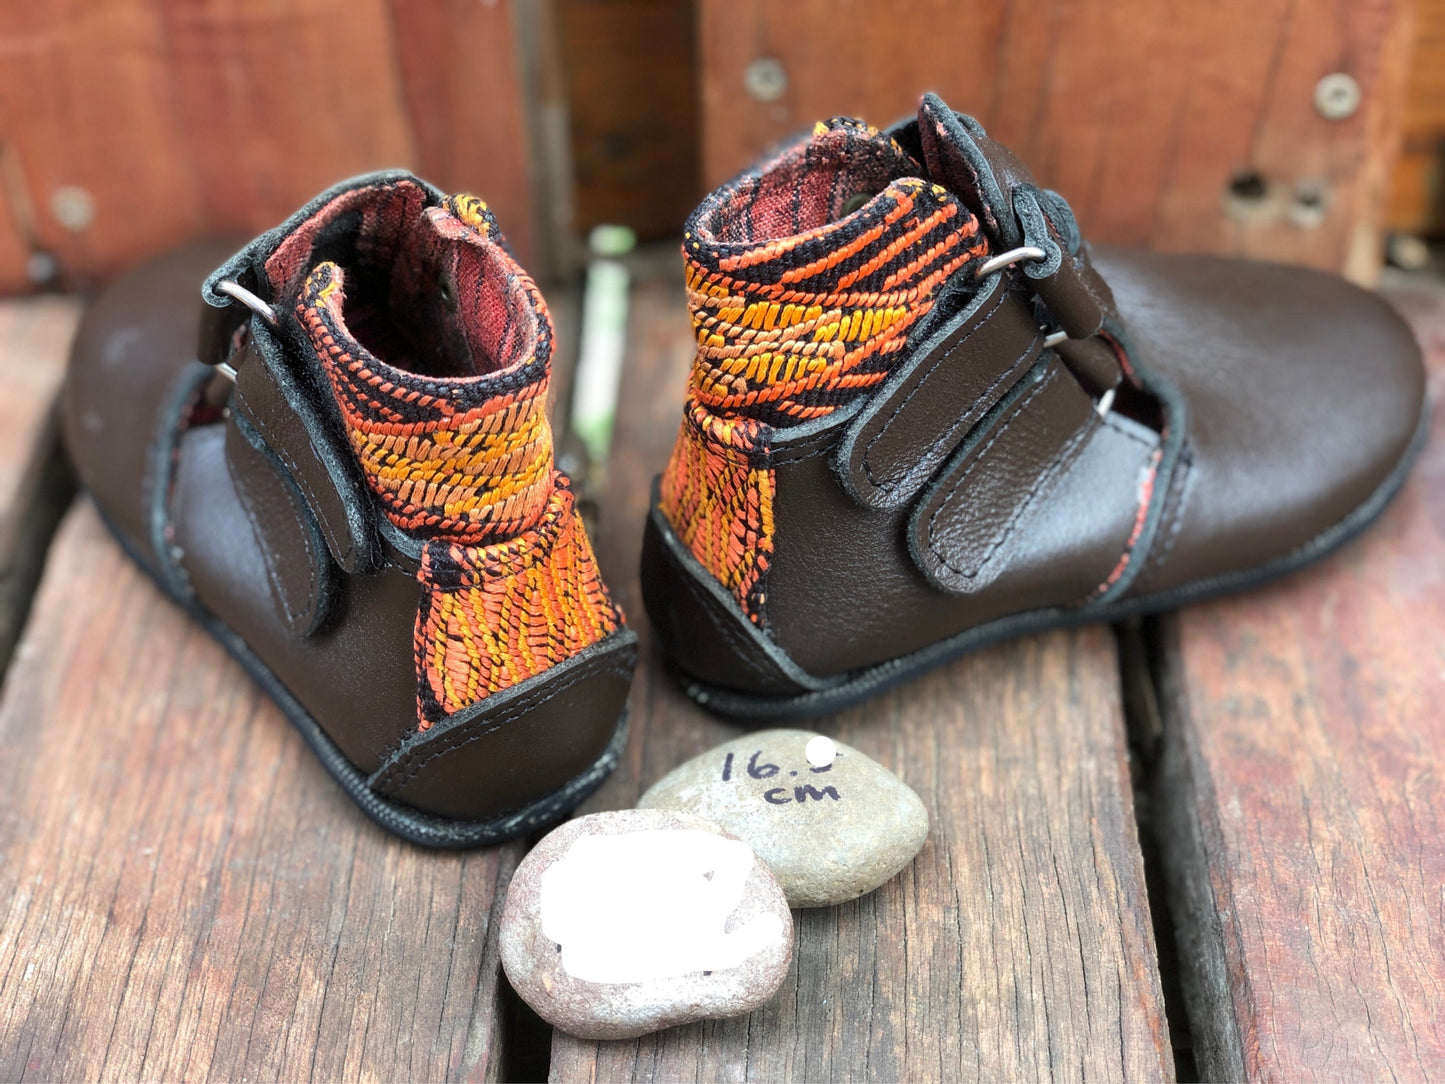 Size 25 Kids Adventure Boots - Brown Leather and Orange Rhombos